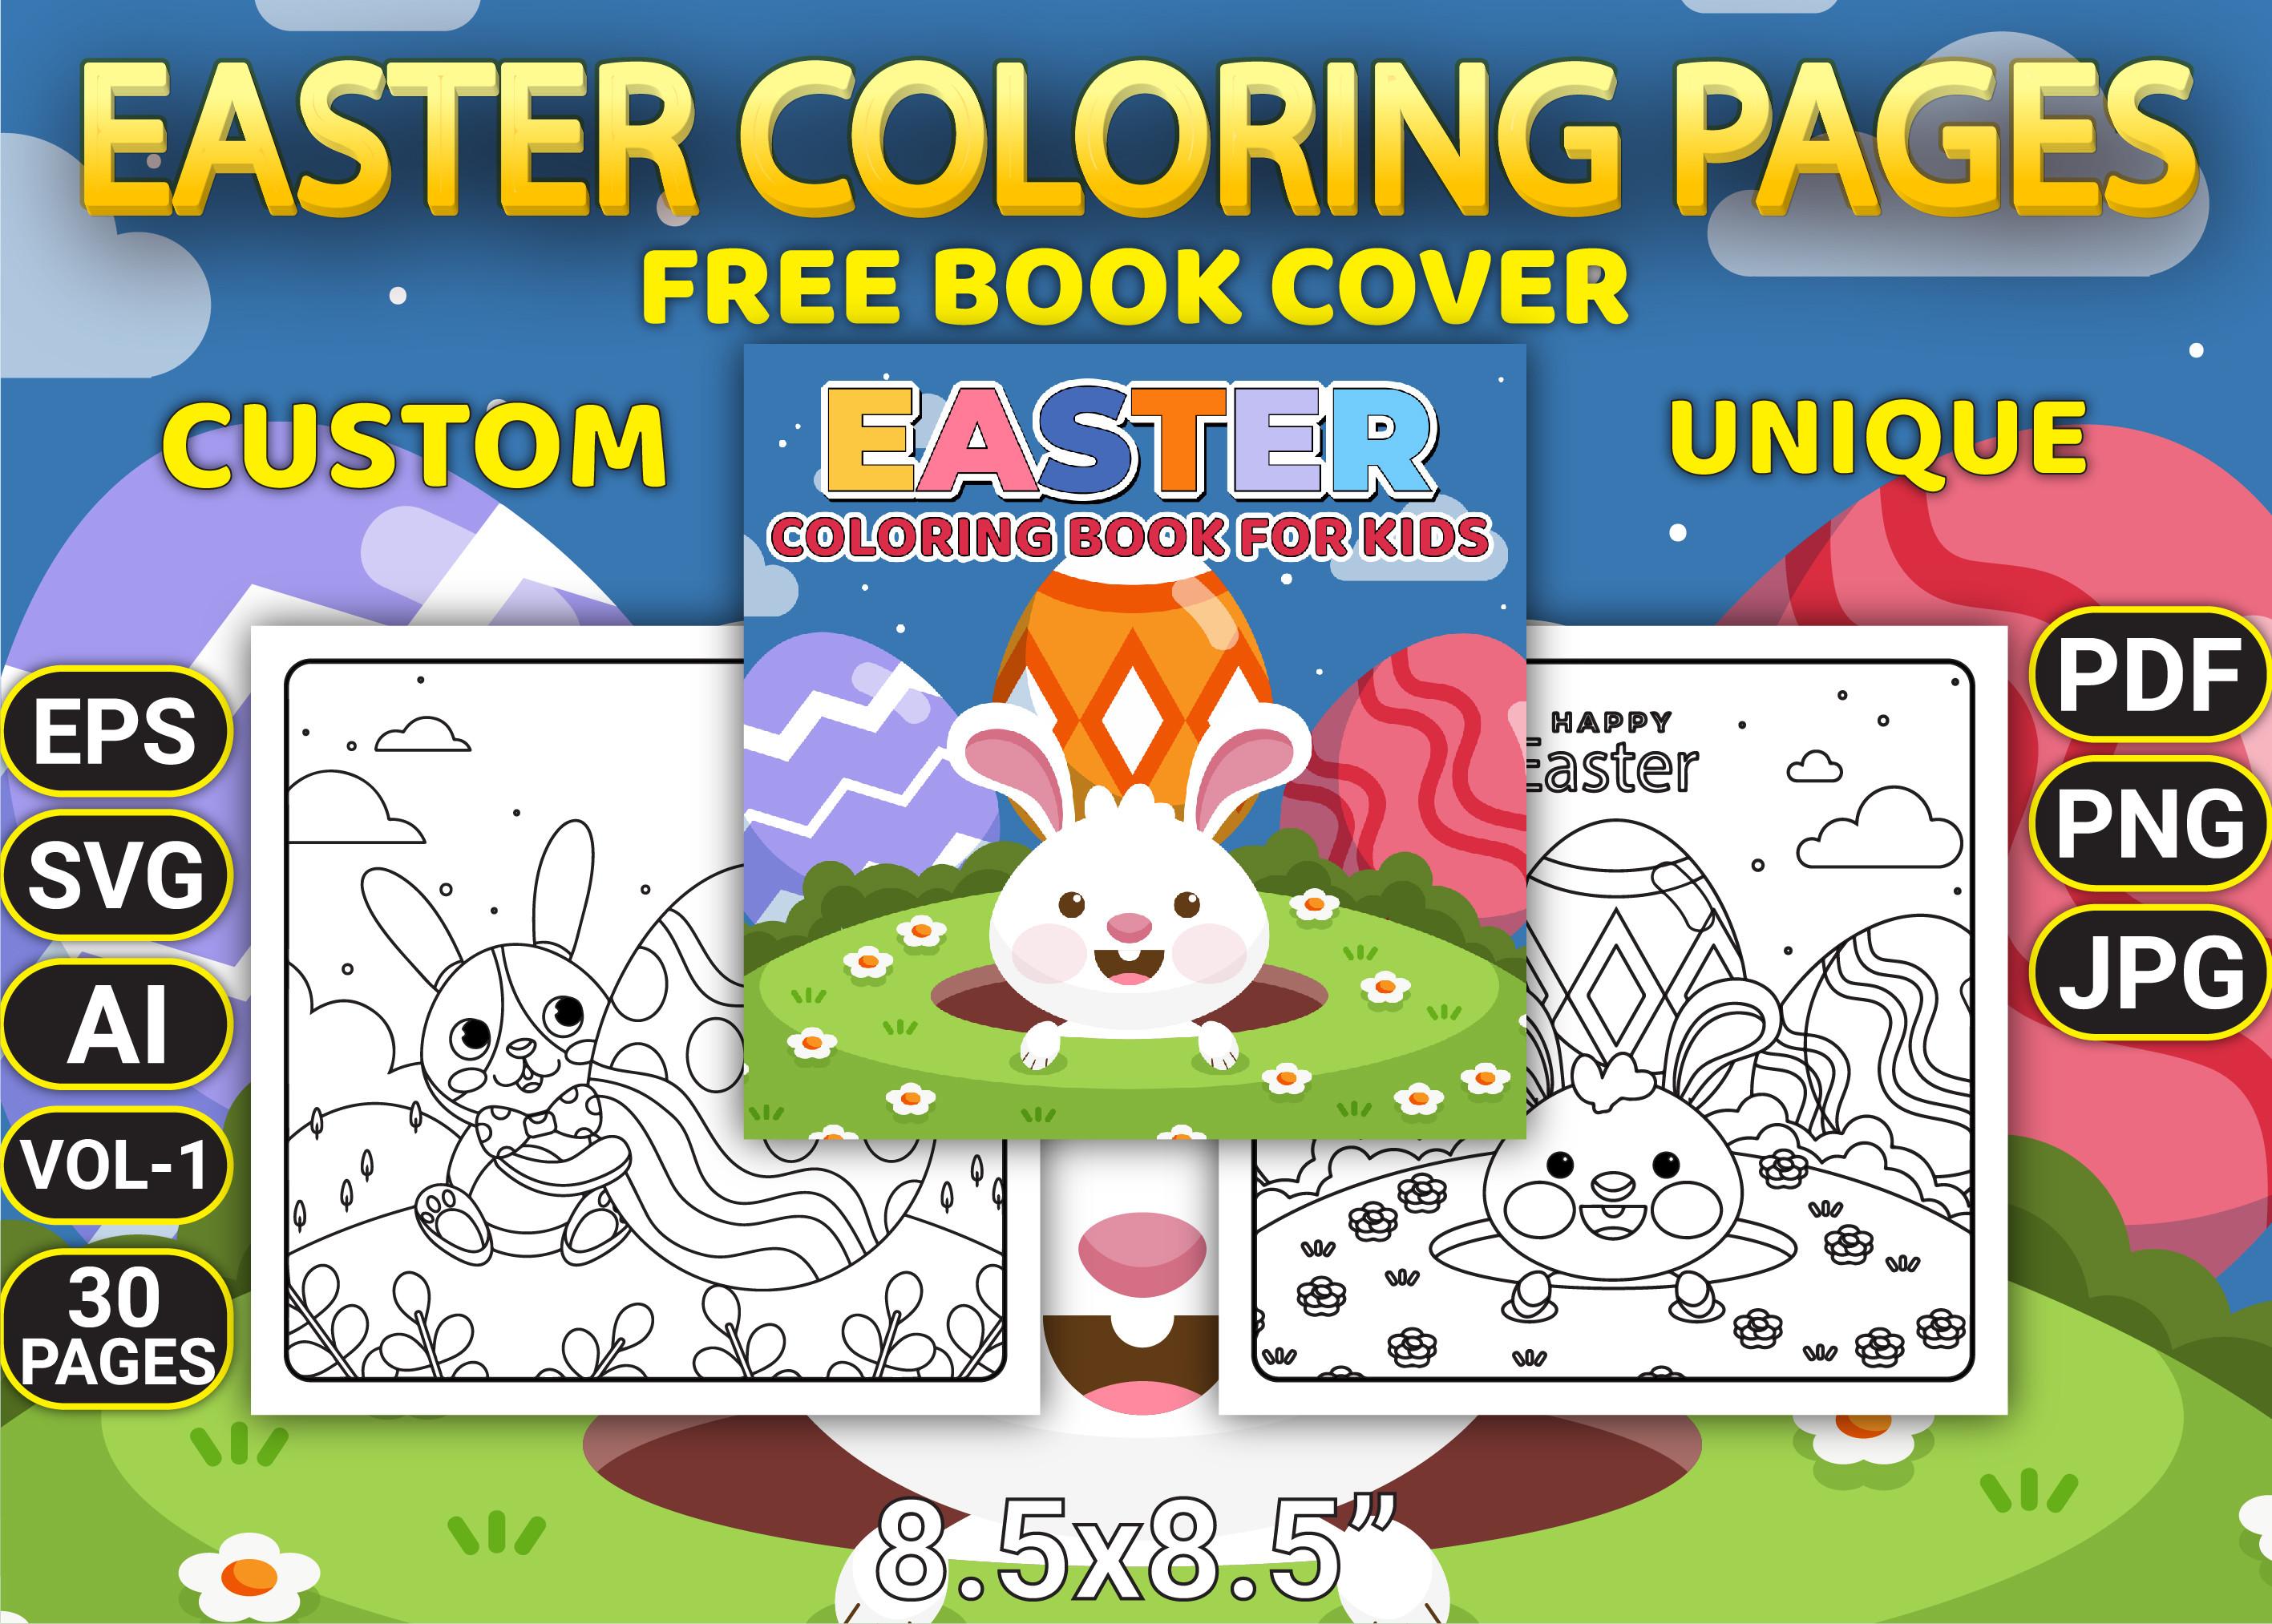 Easter Coloring Pages with Book Cover